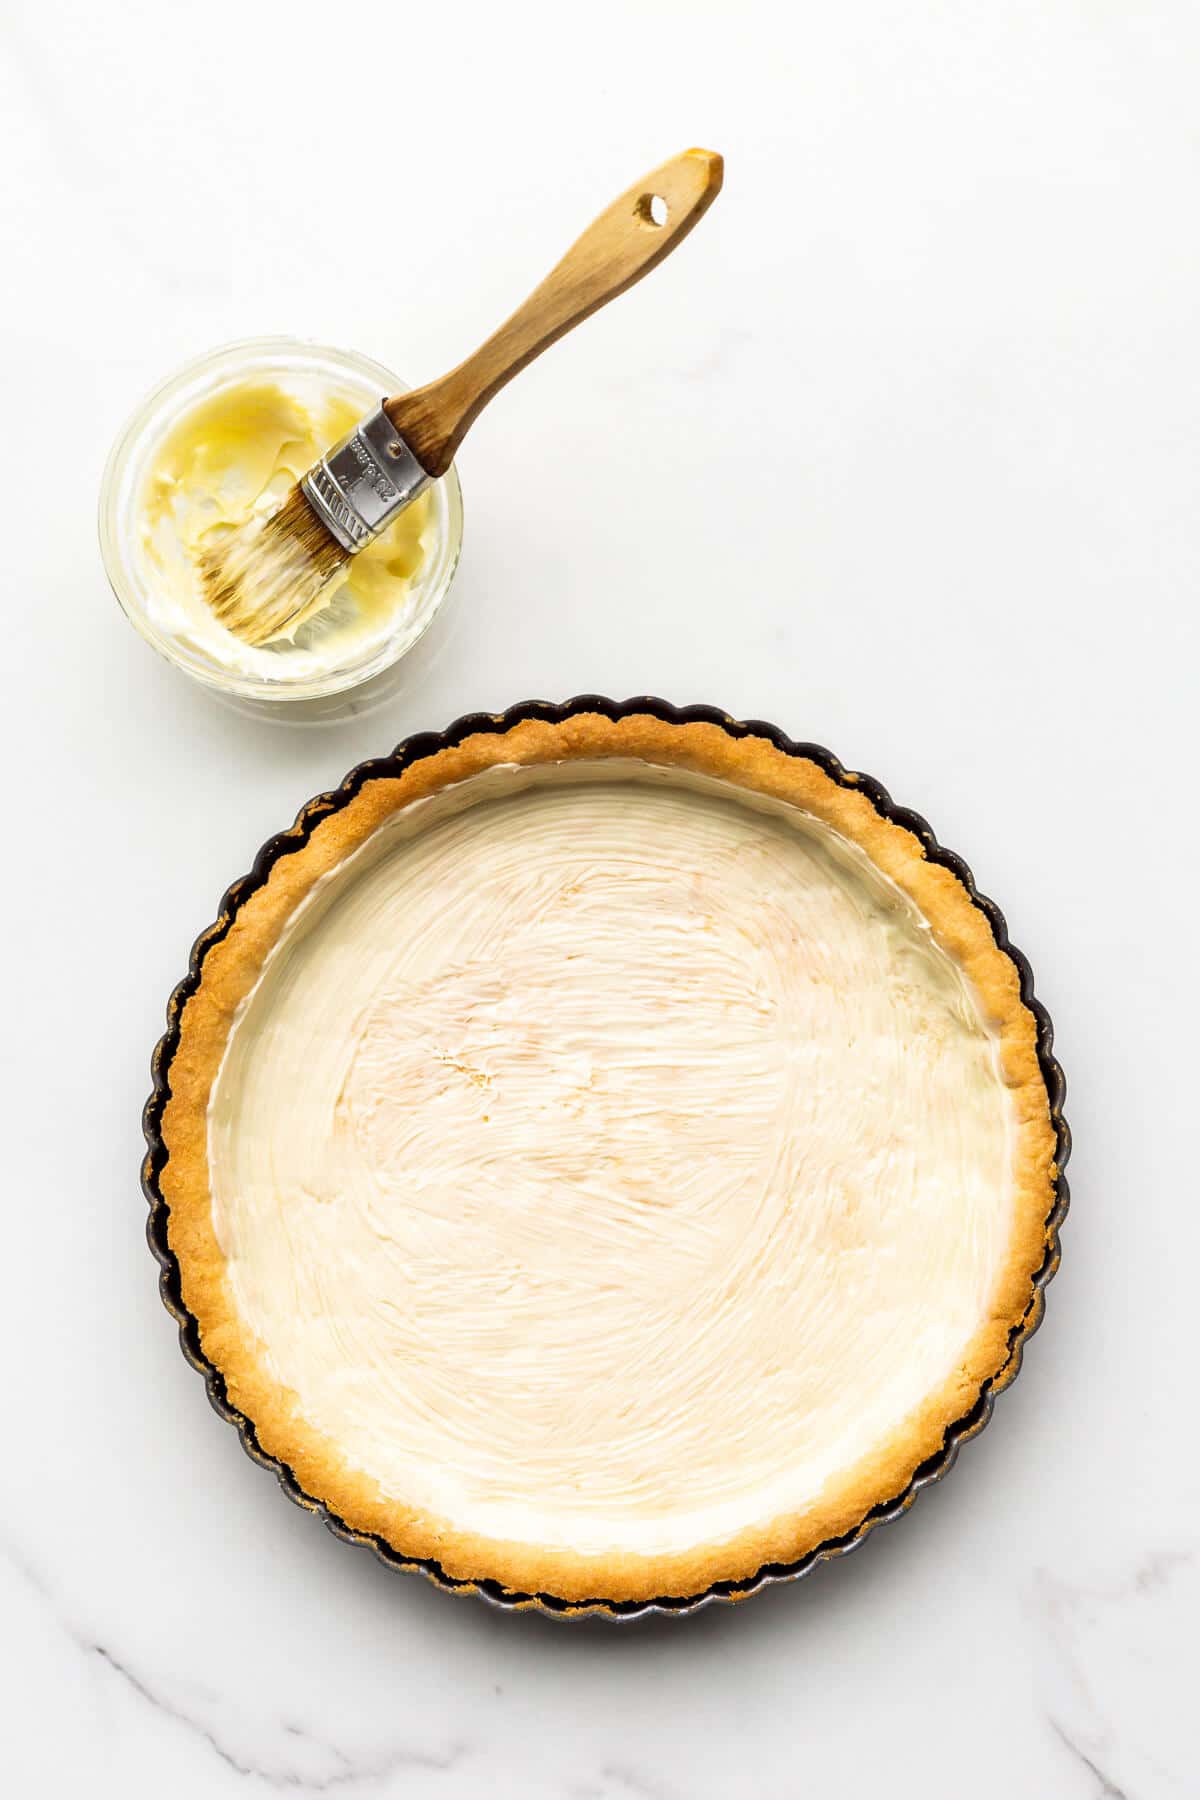 Brushing a baked tart shell with melted white chocolate to seal the pastry crust before filling.